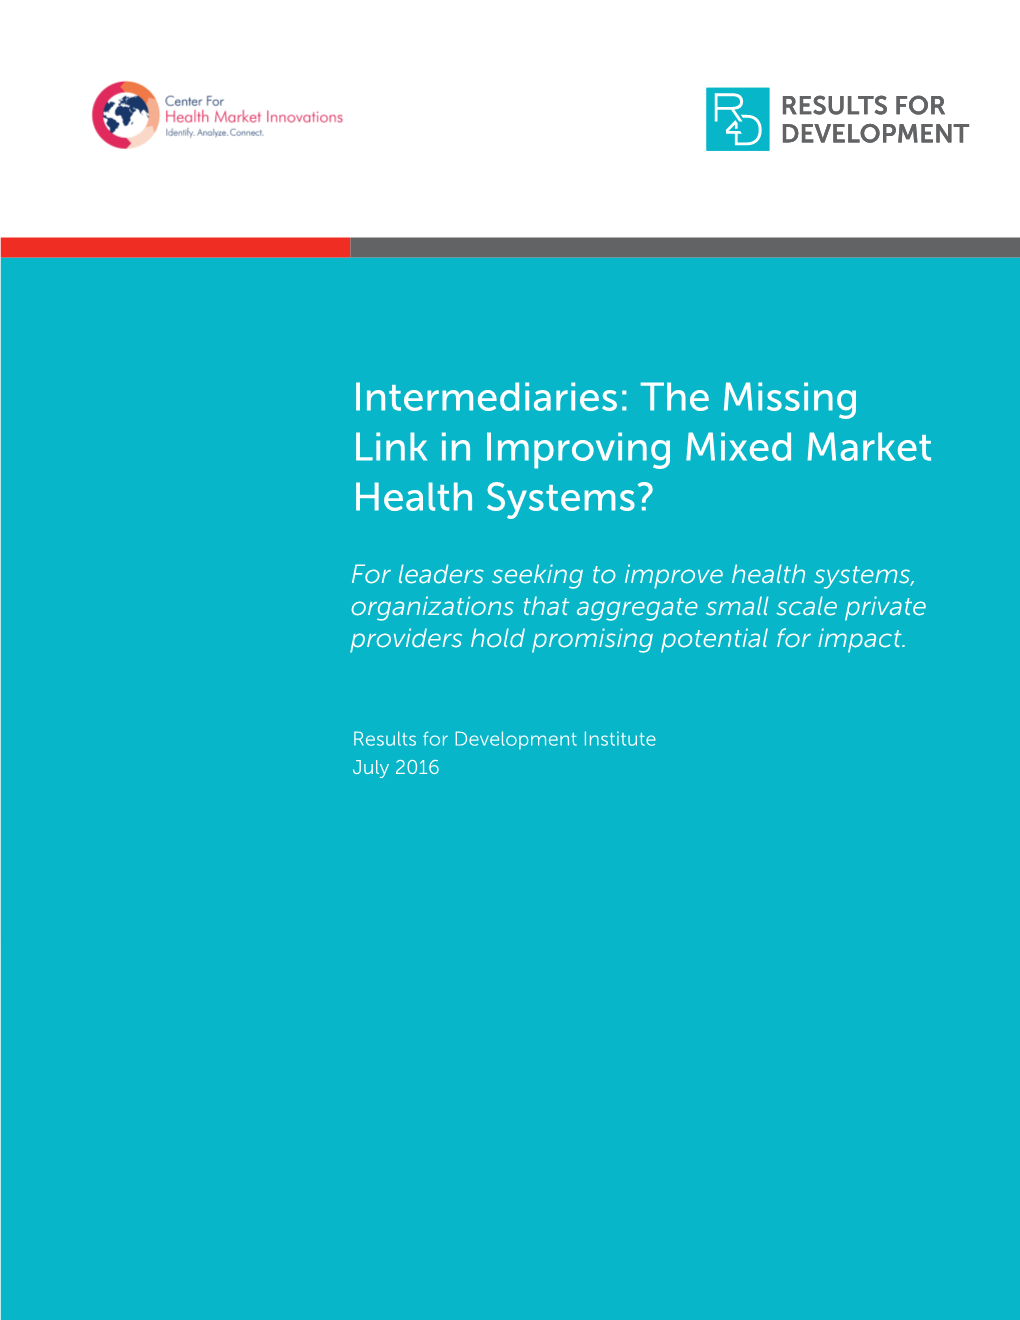 Intermediaries: the Missing Link in Improving Mixed Market Health Systems?